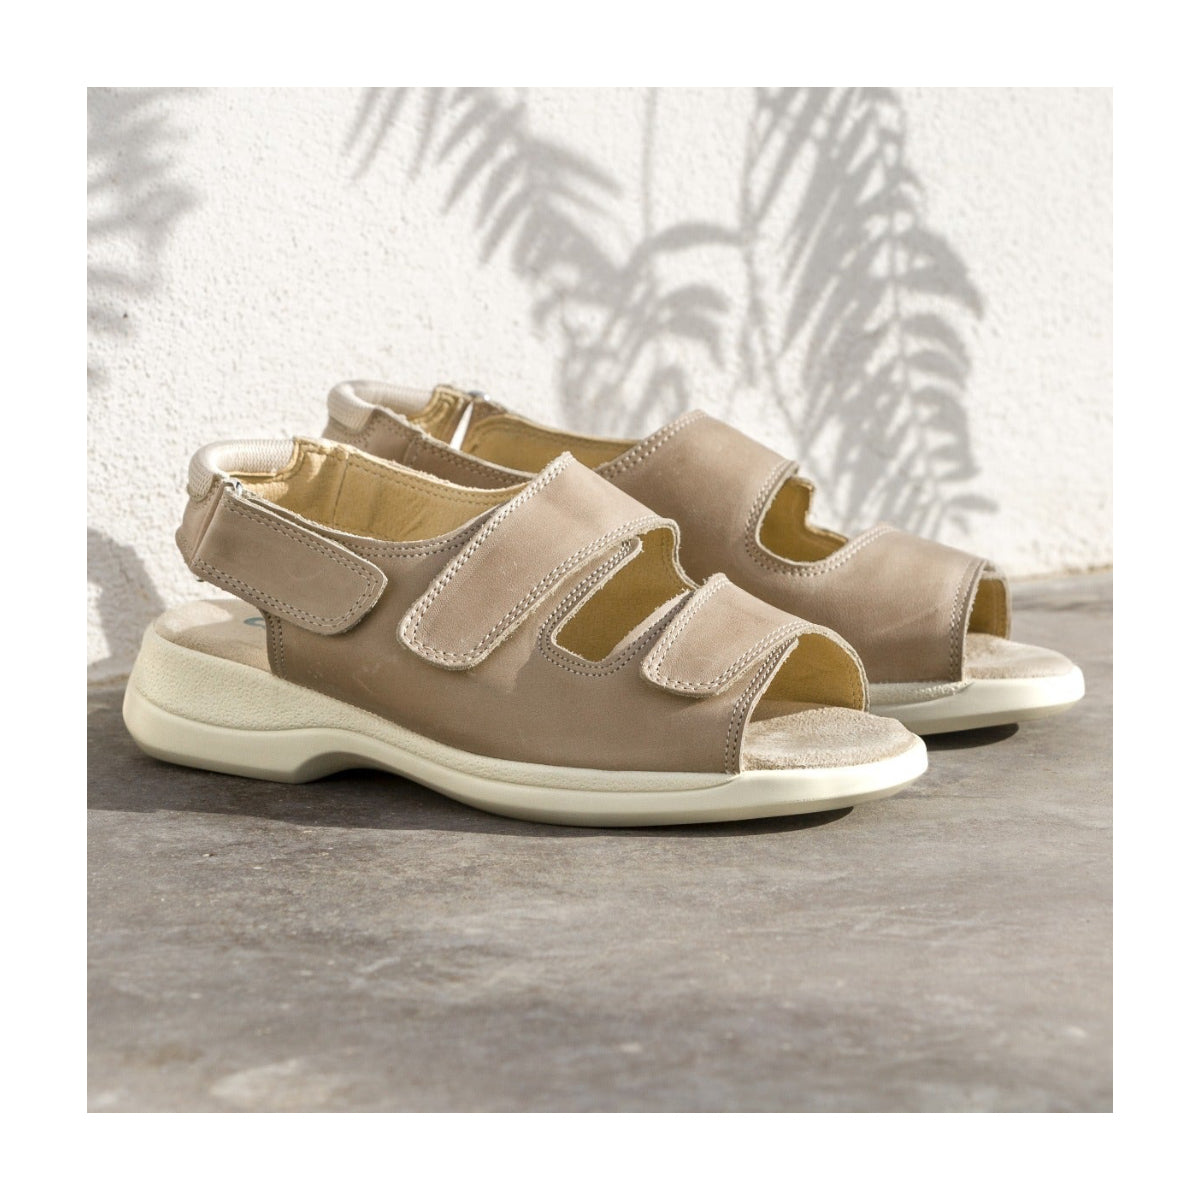 Sunny. A contemporary looking sandal with triple fastenings